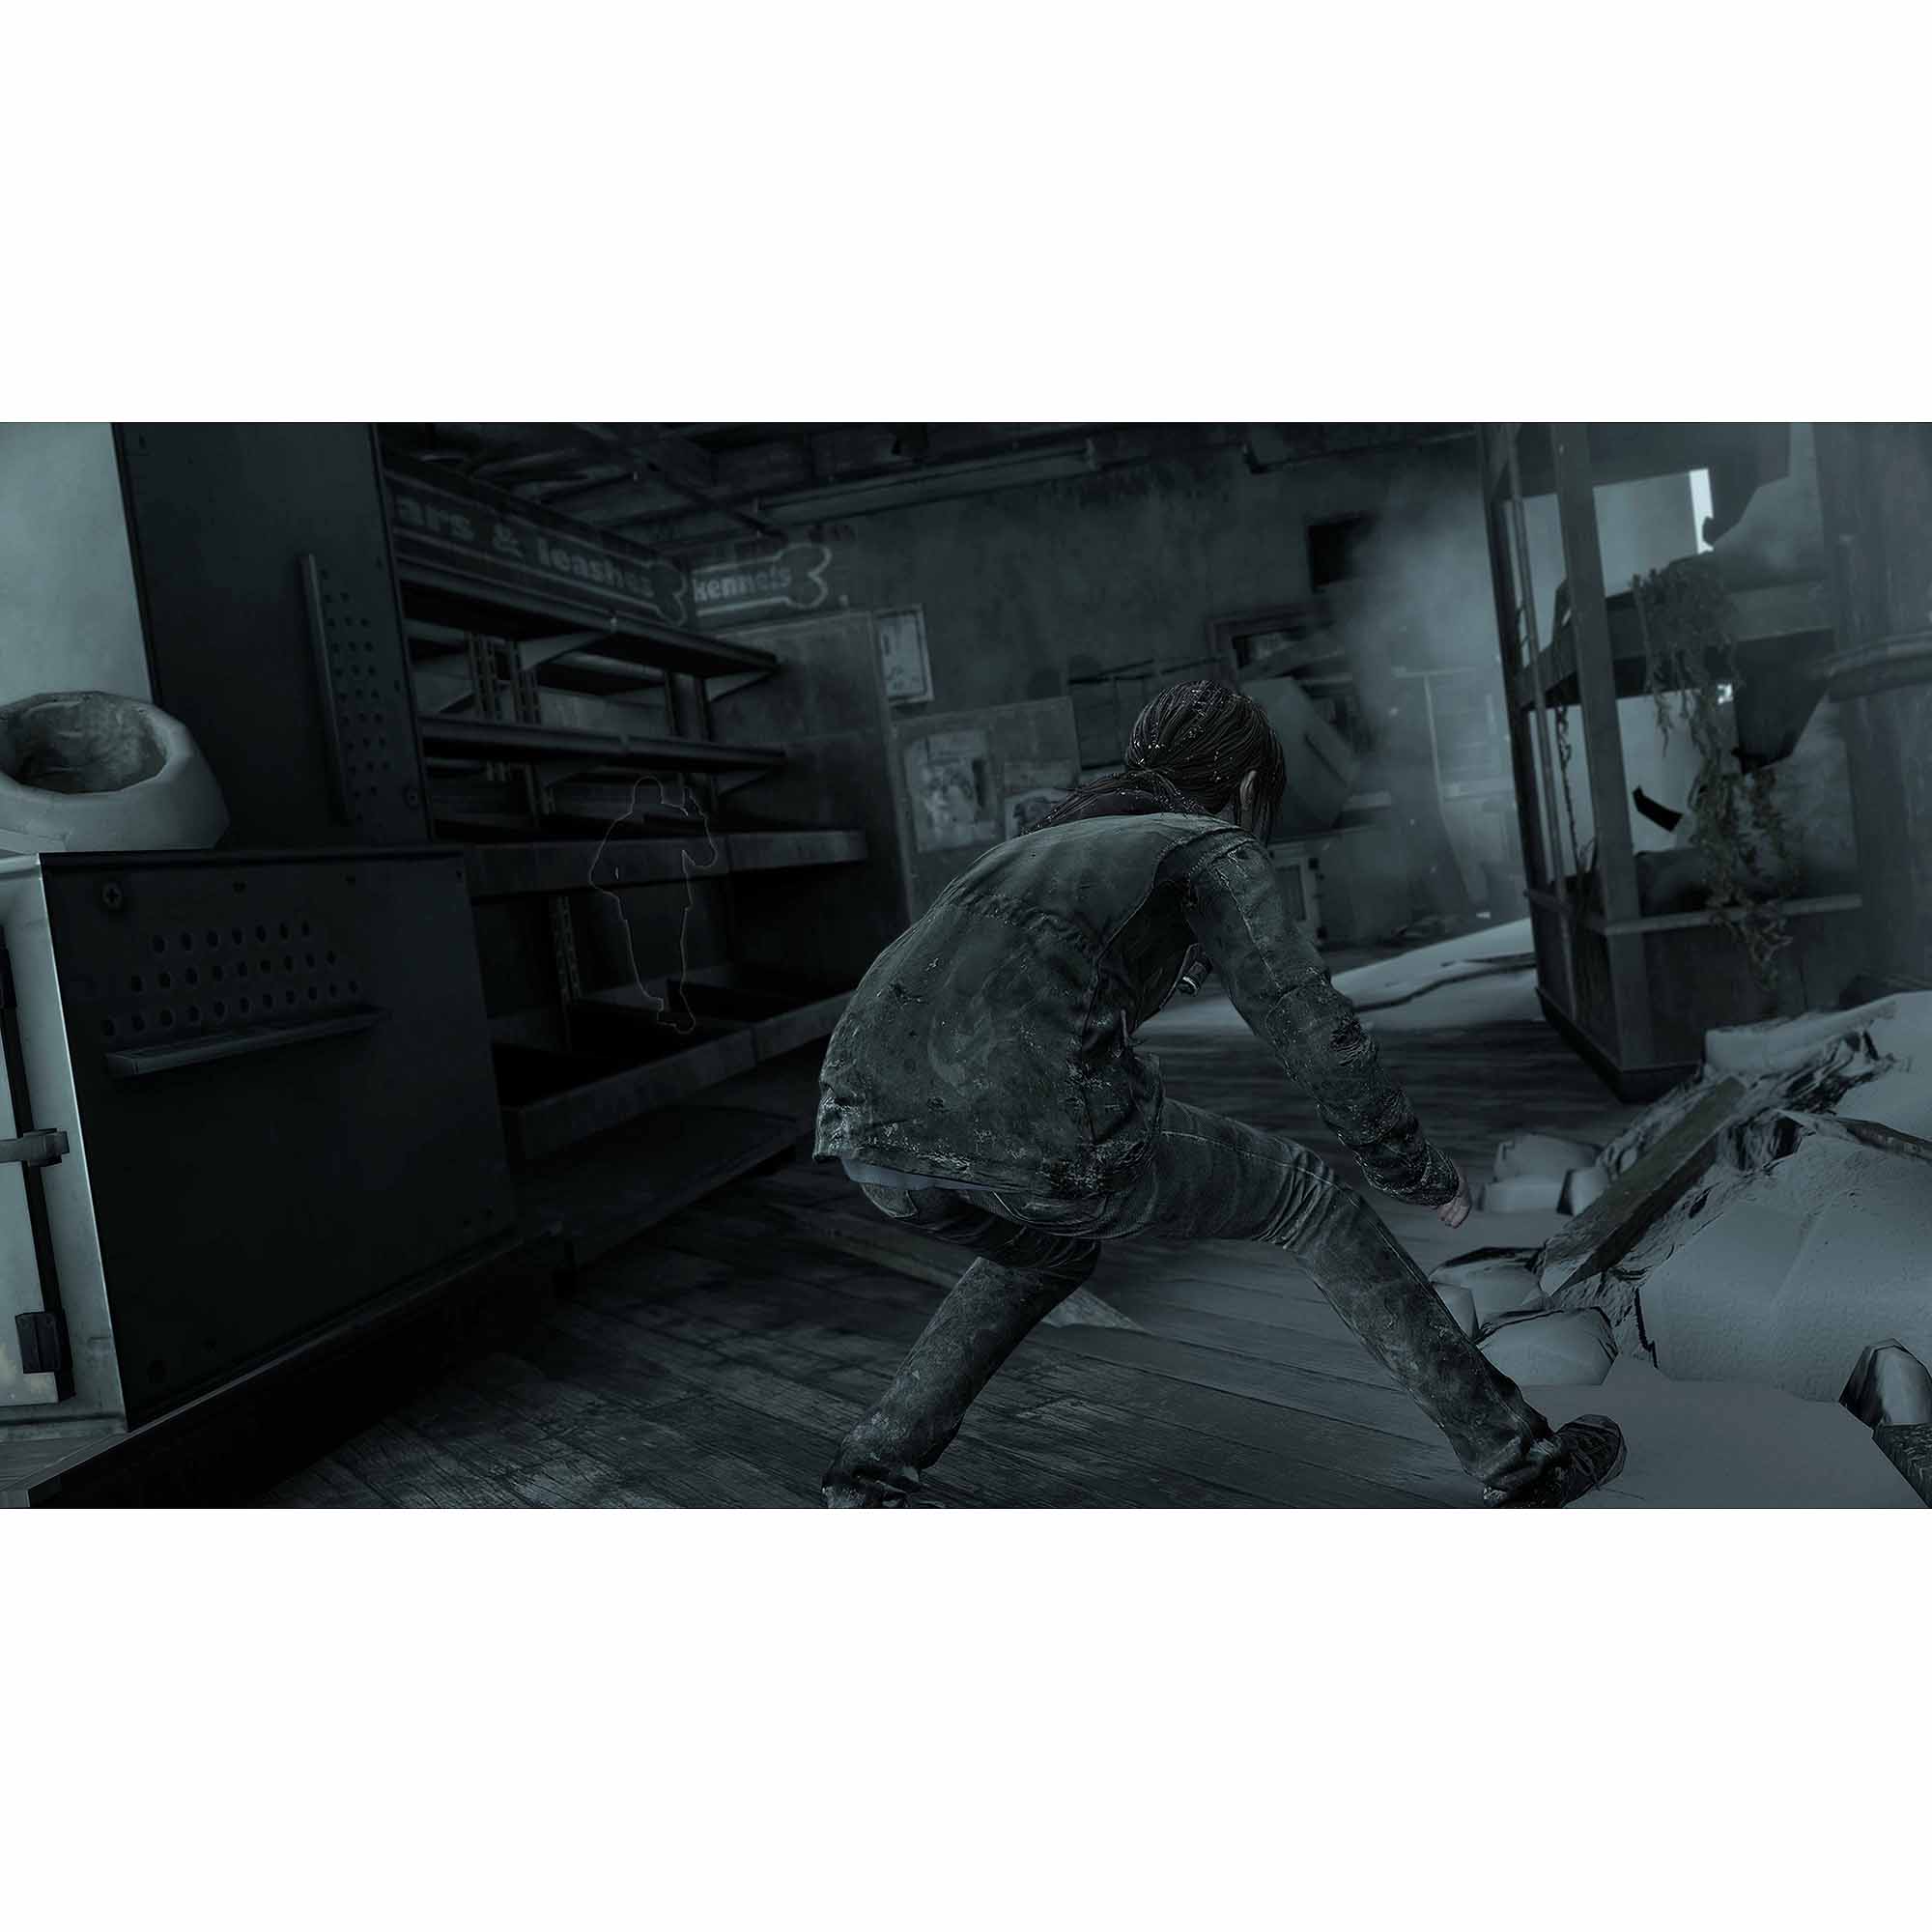 The Last of Us Remastered - PlayStation 4 - image 15 of 19